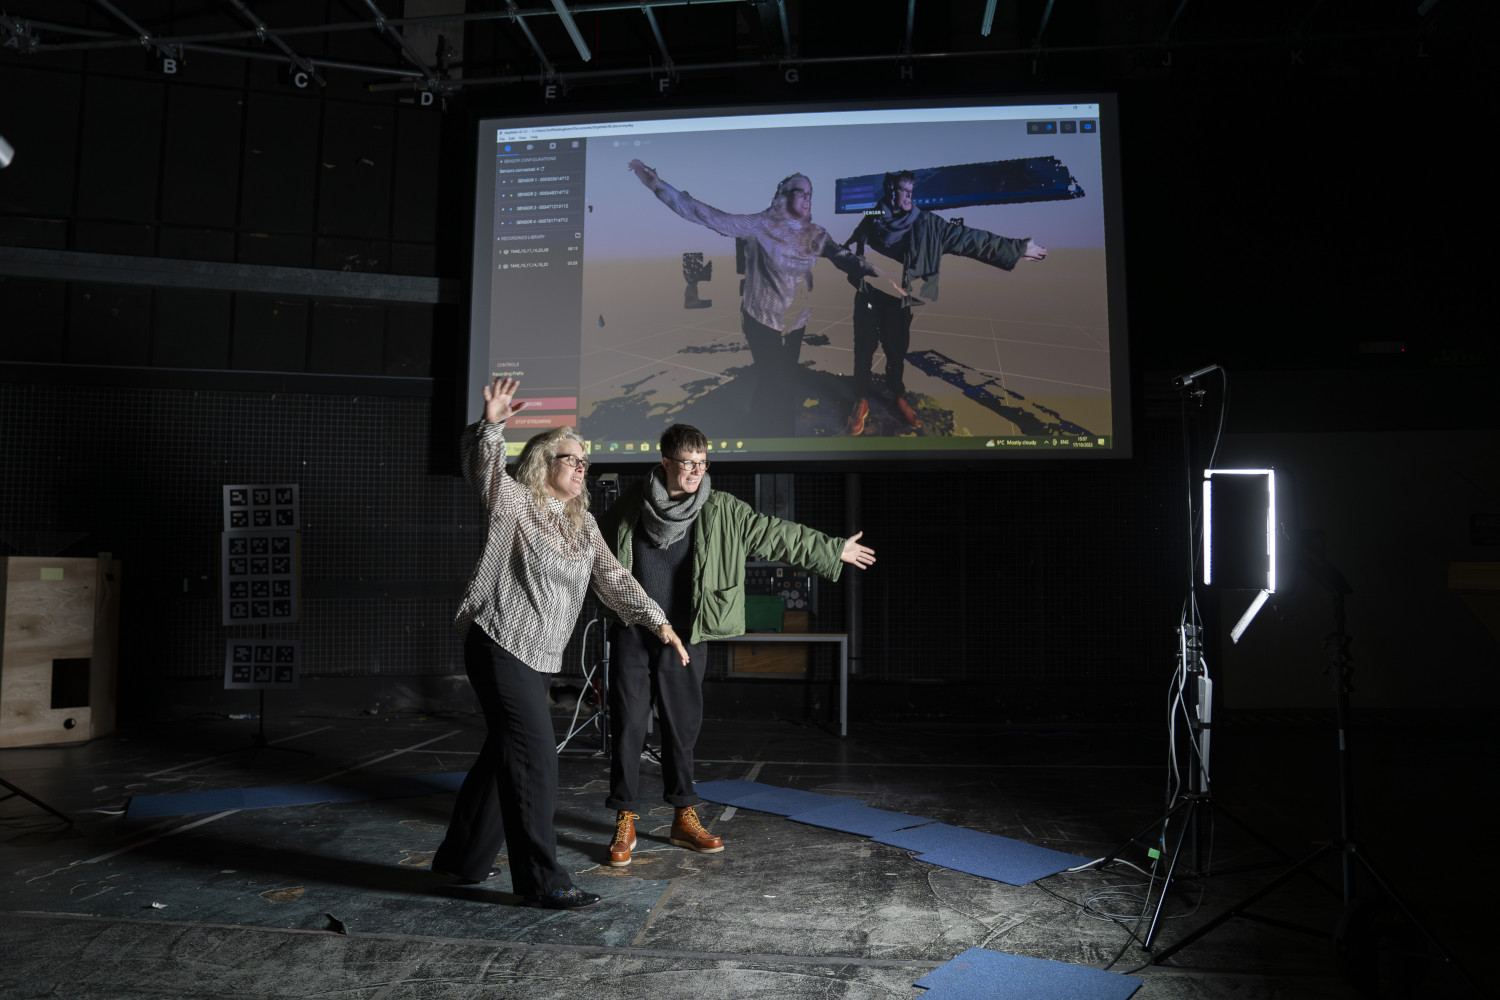 Two women stand in front of a projector screen holding their arms open – their image is shown on the projector screen.